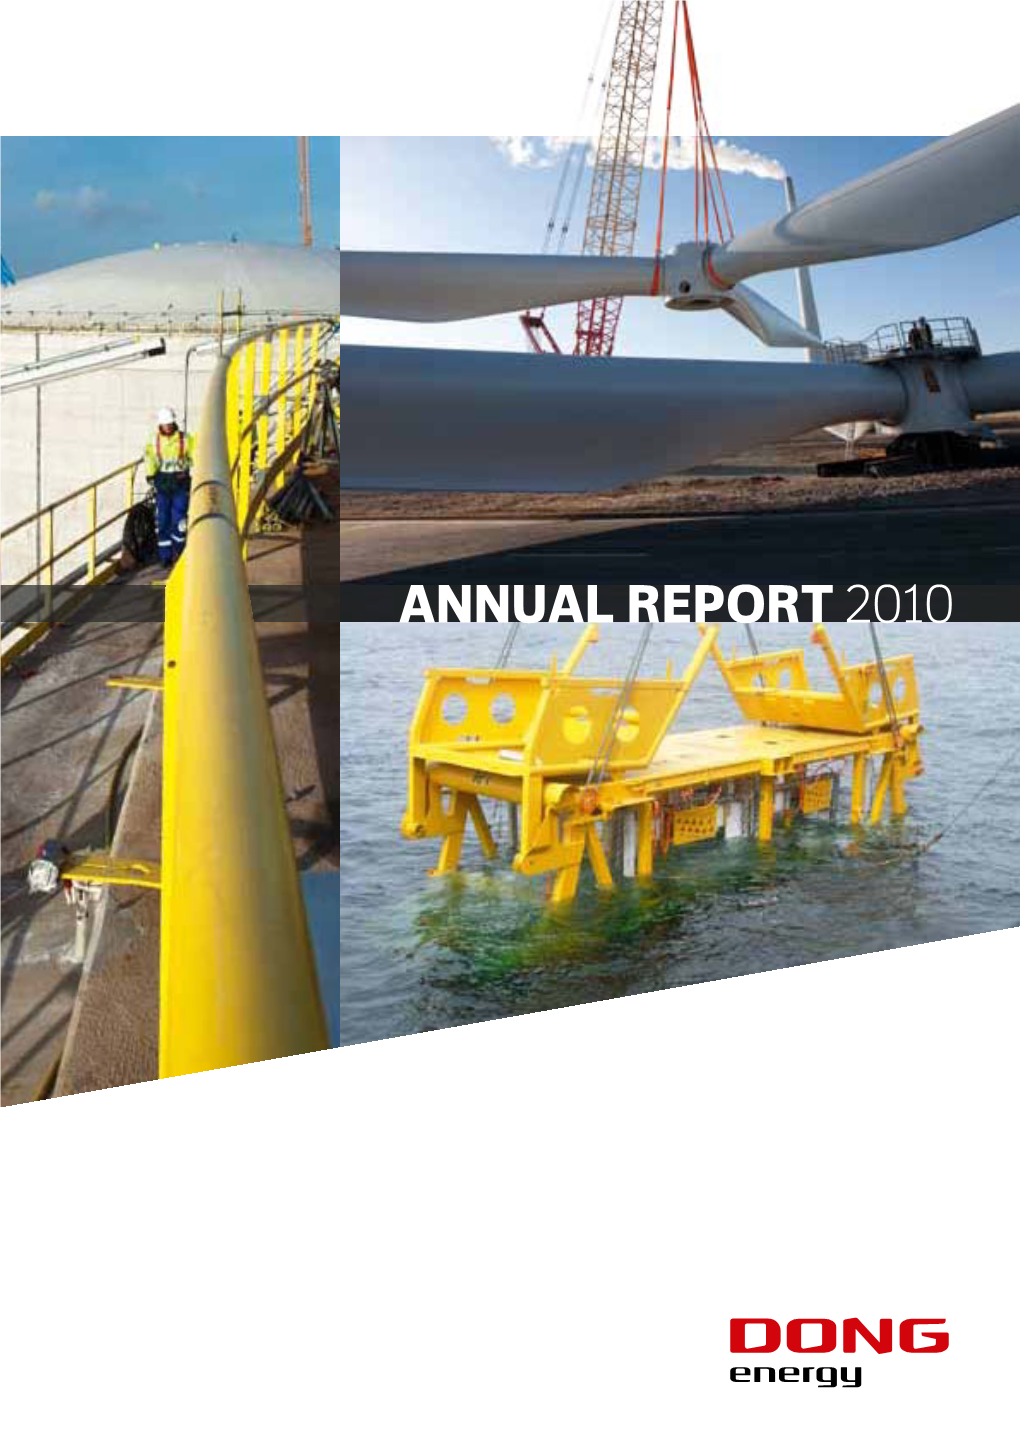 Annual Report 2010 DONG Energy at a Glance